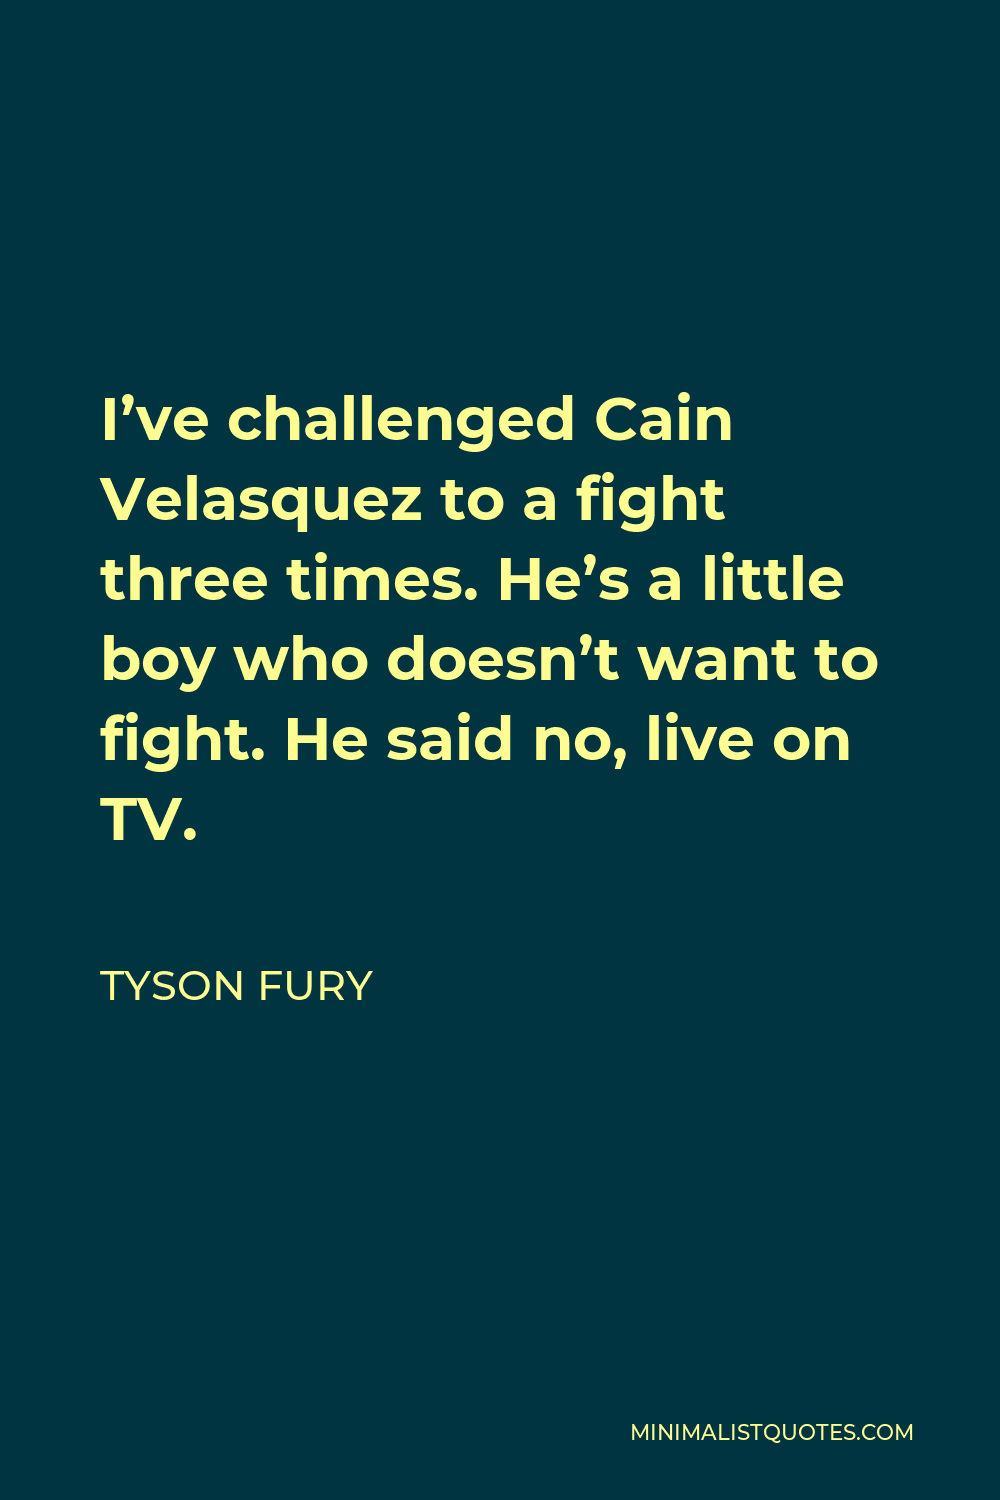 Tyson Fury Quote - I’ve challenged Cain Velasquez to a fight three times. He’s a little boy who doesn’t want to fight. He said no, live on TV.